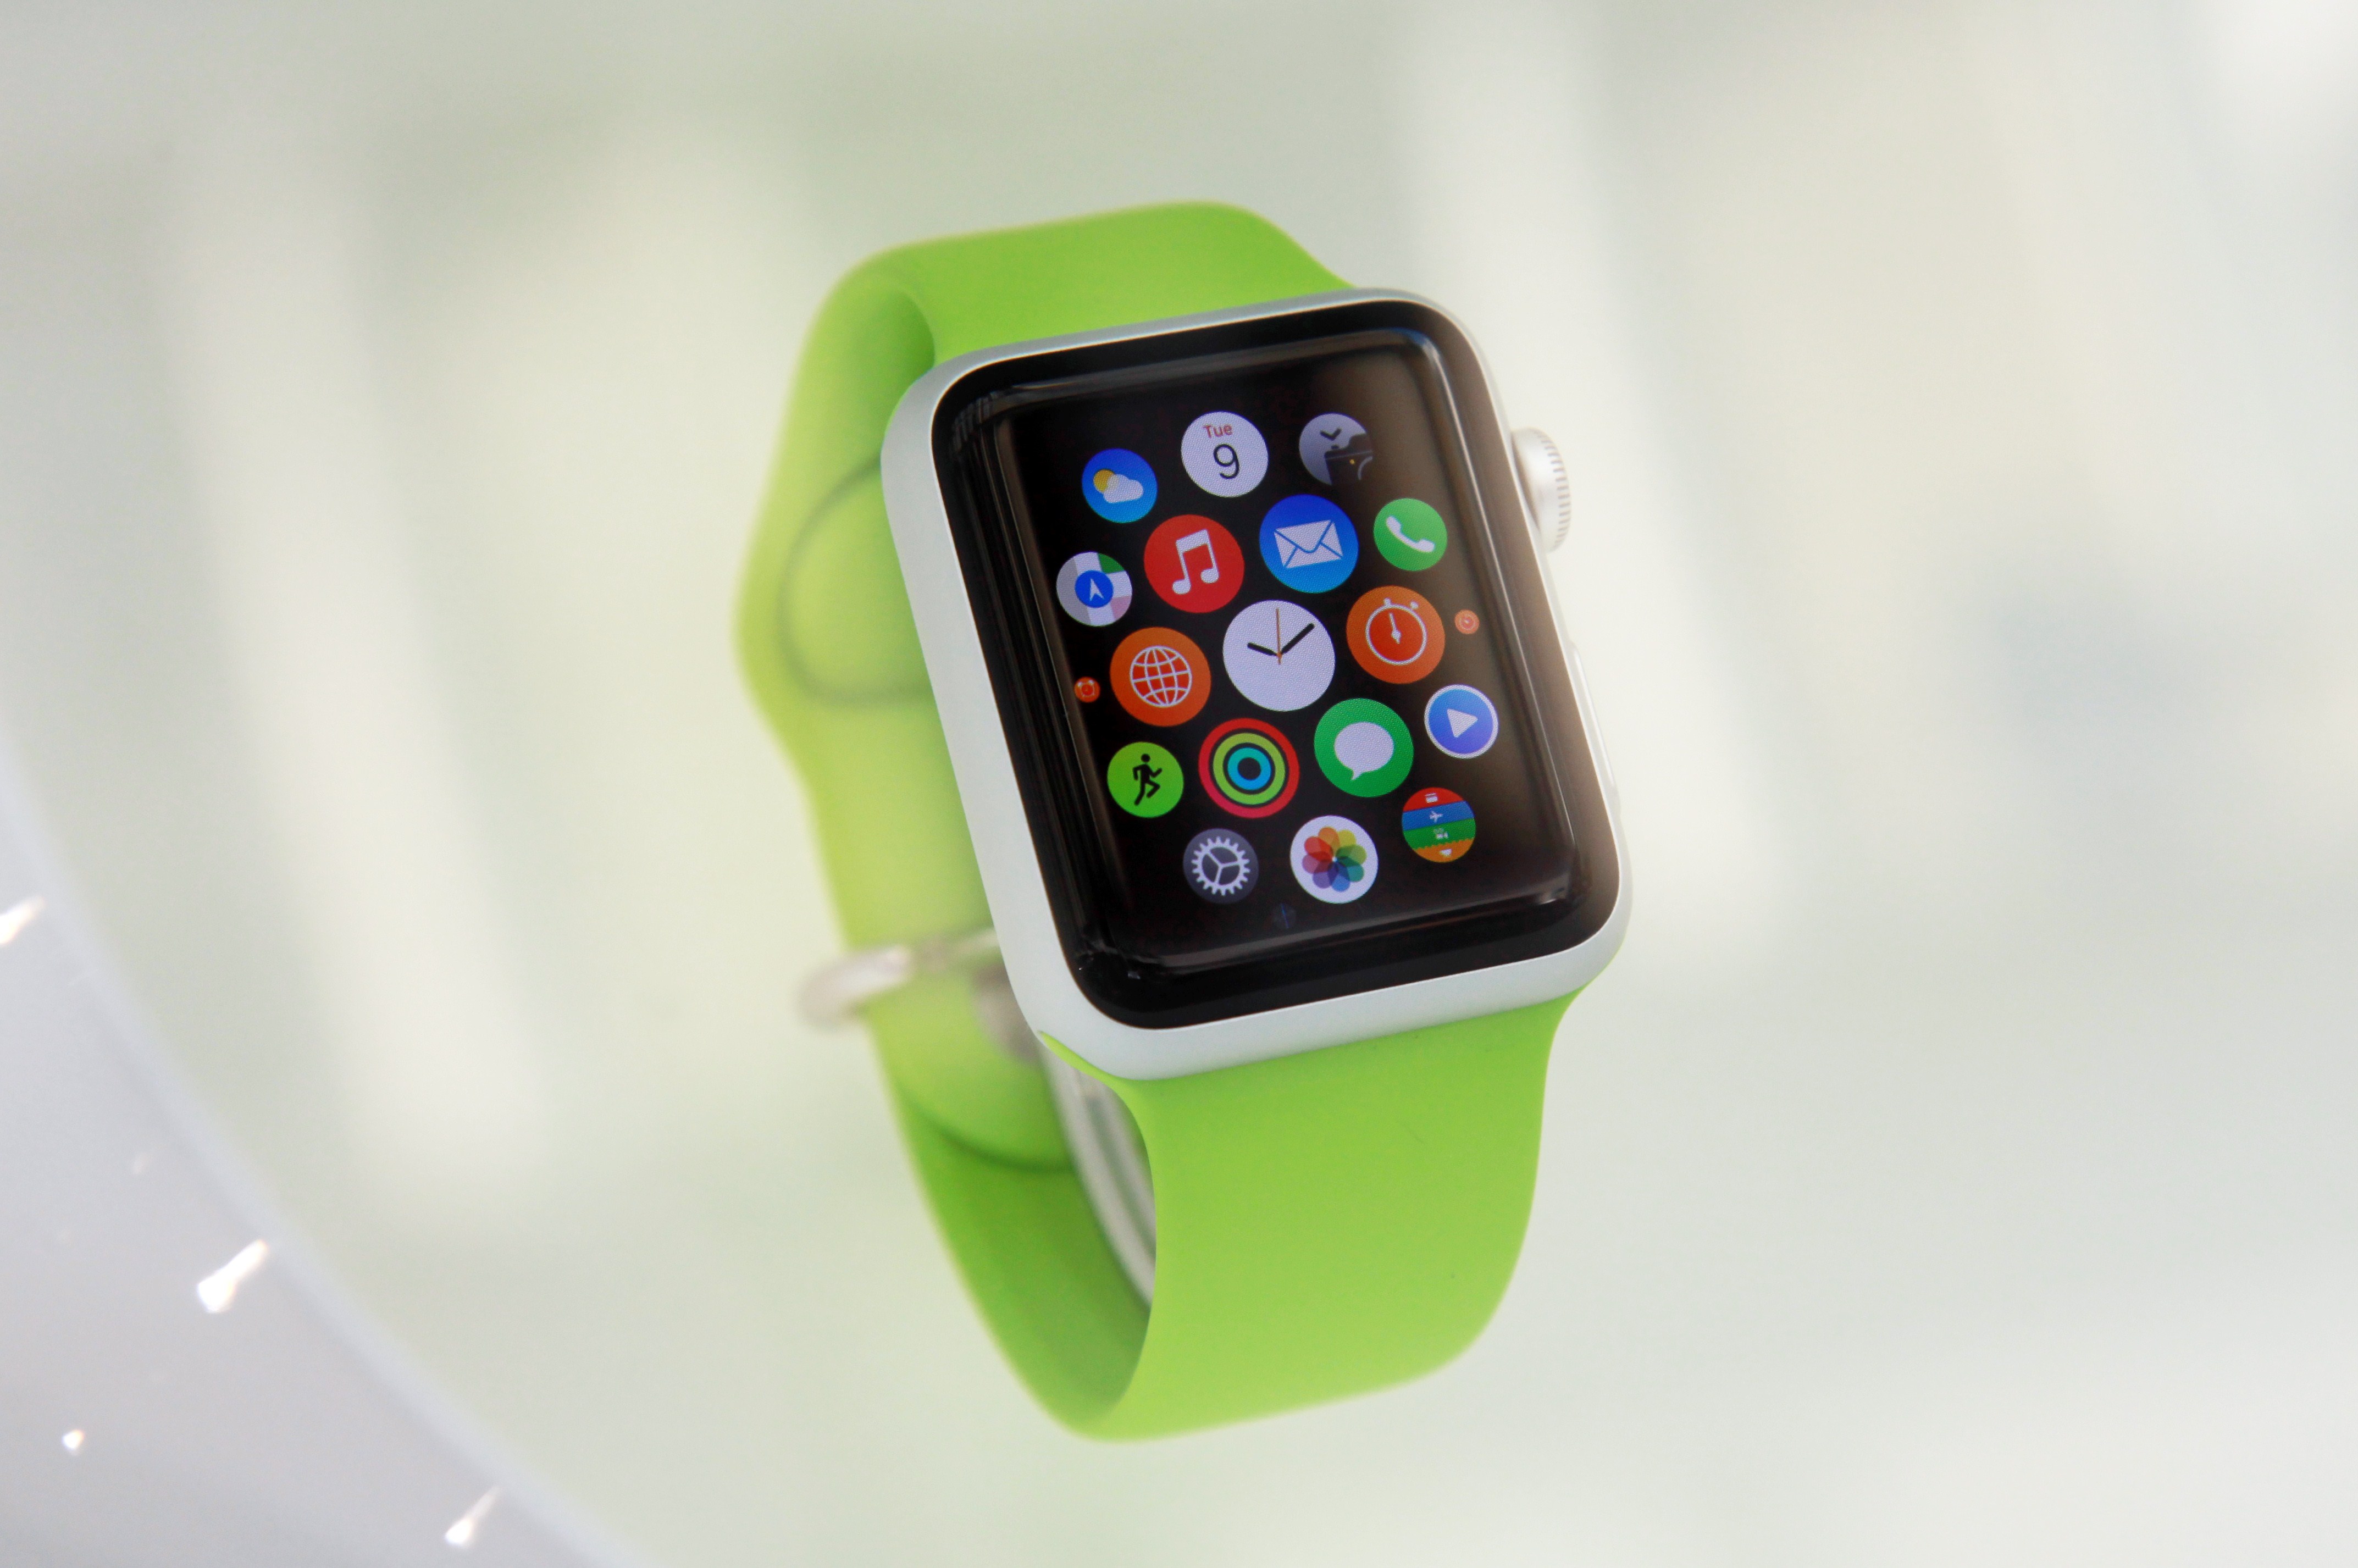 View of the Apple watch displayed in a shop on September 30, 2014. (Loic Venance&mdash;AFP/Getty Images)